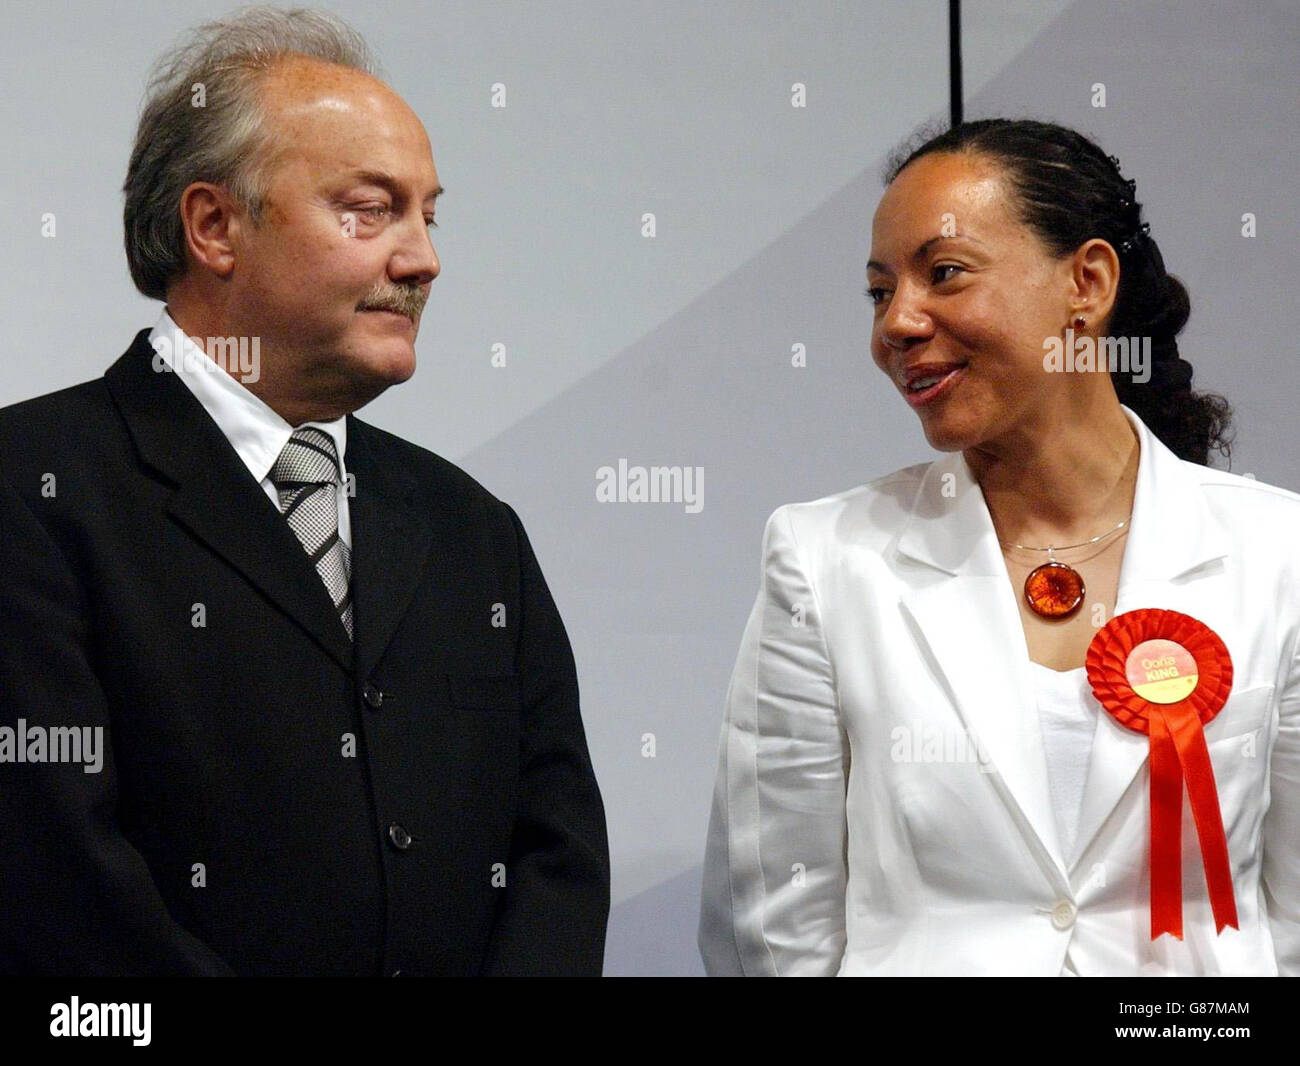 Former Labour MP and new Respect party MP George Galloway is congratulated by Labour MP Oona King (right) after winning the Bethnal Green & Bow constituency at the East Winter Gardens. Galloway, standing as a Respect party candidate, beat previous Labour MP Oona King for the seat which had been held by Labour since 1945. Stock Photo